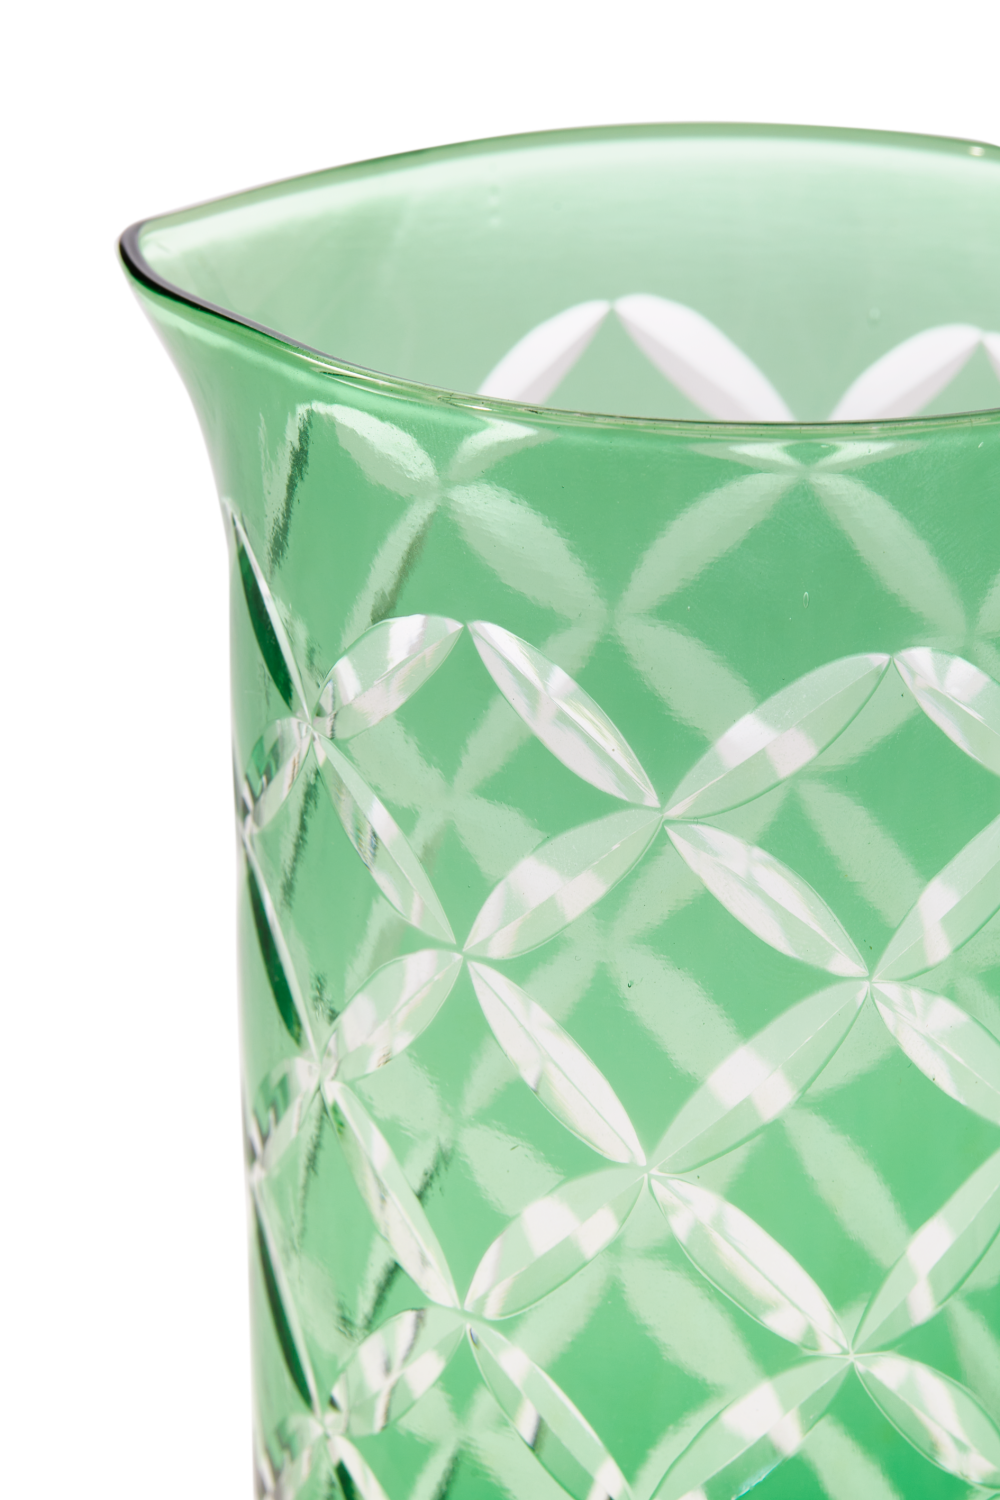 Patterned Green Glass Pitcher | Pols Potten Cuttings | Oroa.com